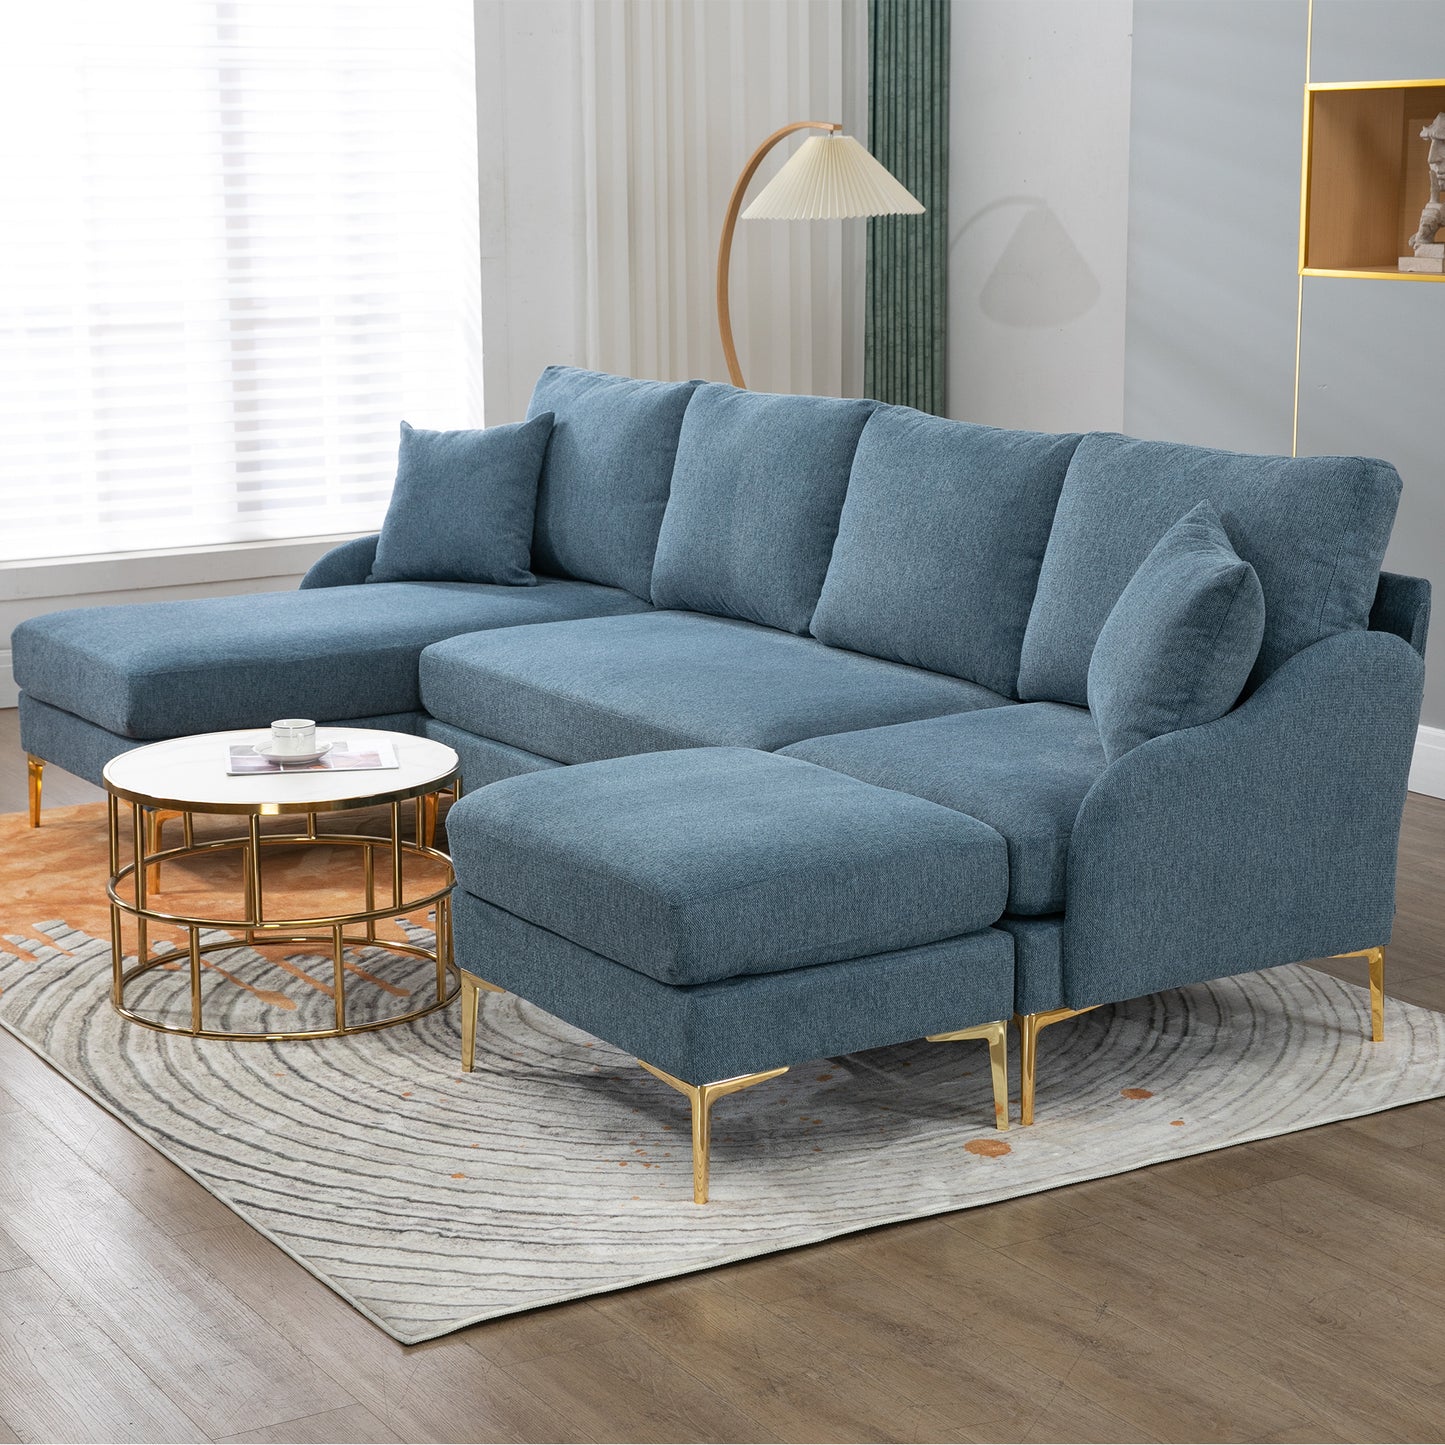 110 Wide Blue Reversible Sectional Sofa with Ottoman and Pillows